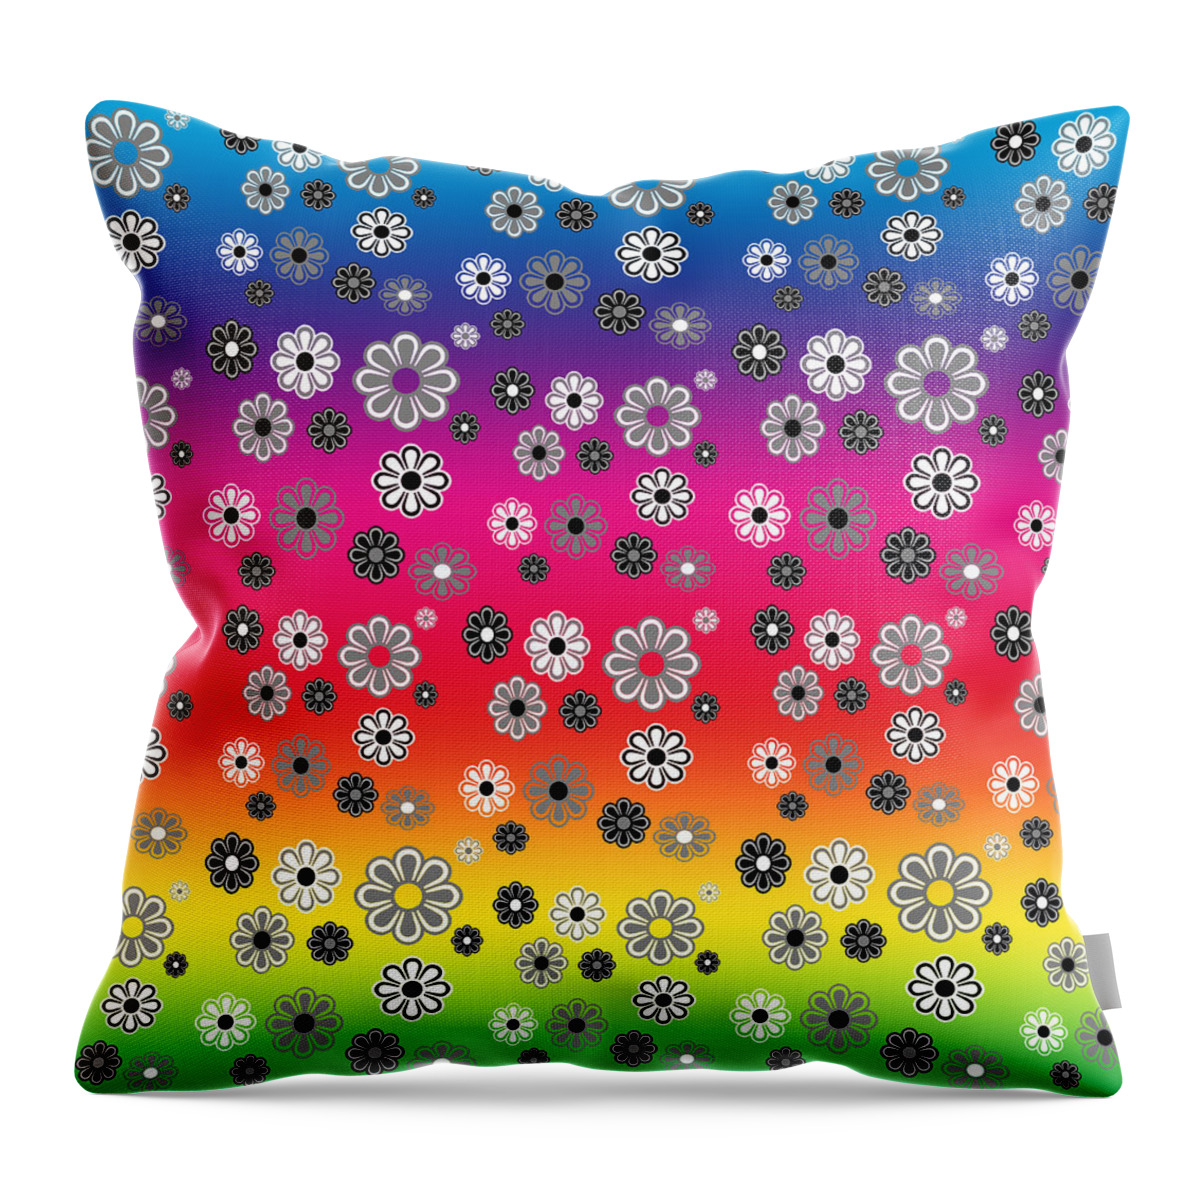 Rainbow Throw Pillow featuring the digital art Flower Power Groovy Multicolor by Denise Beverly